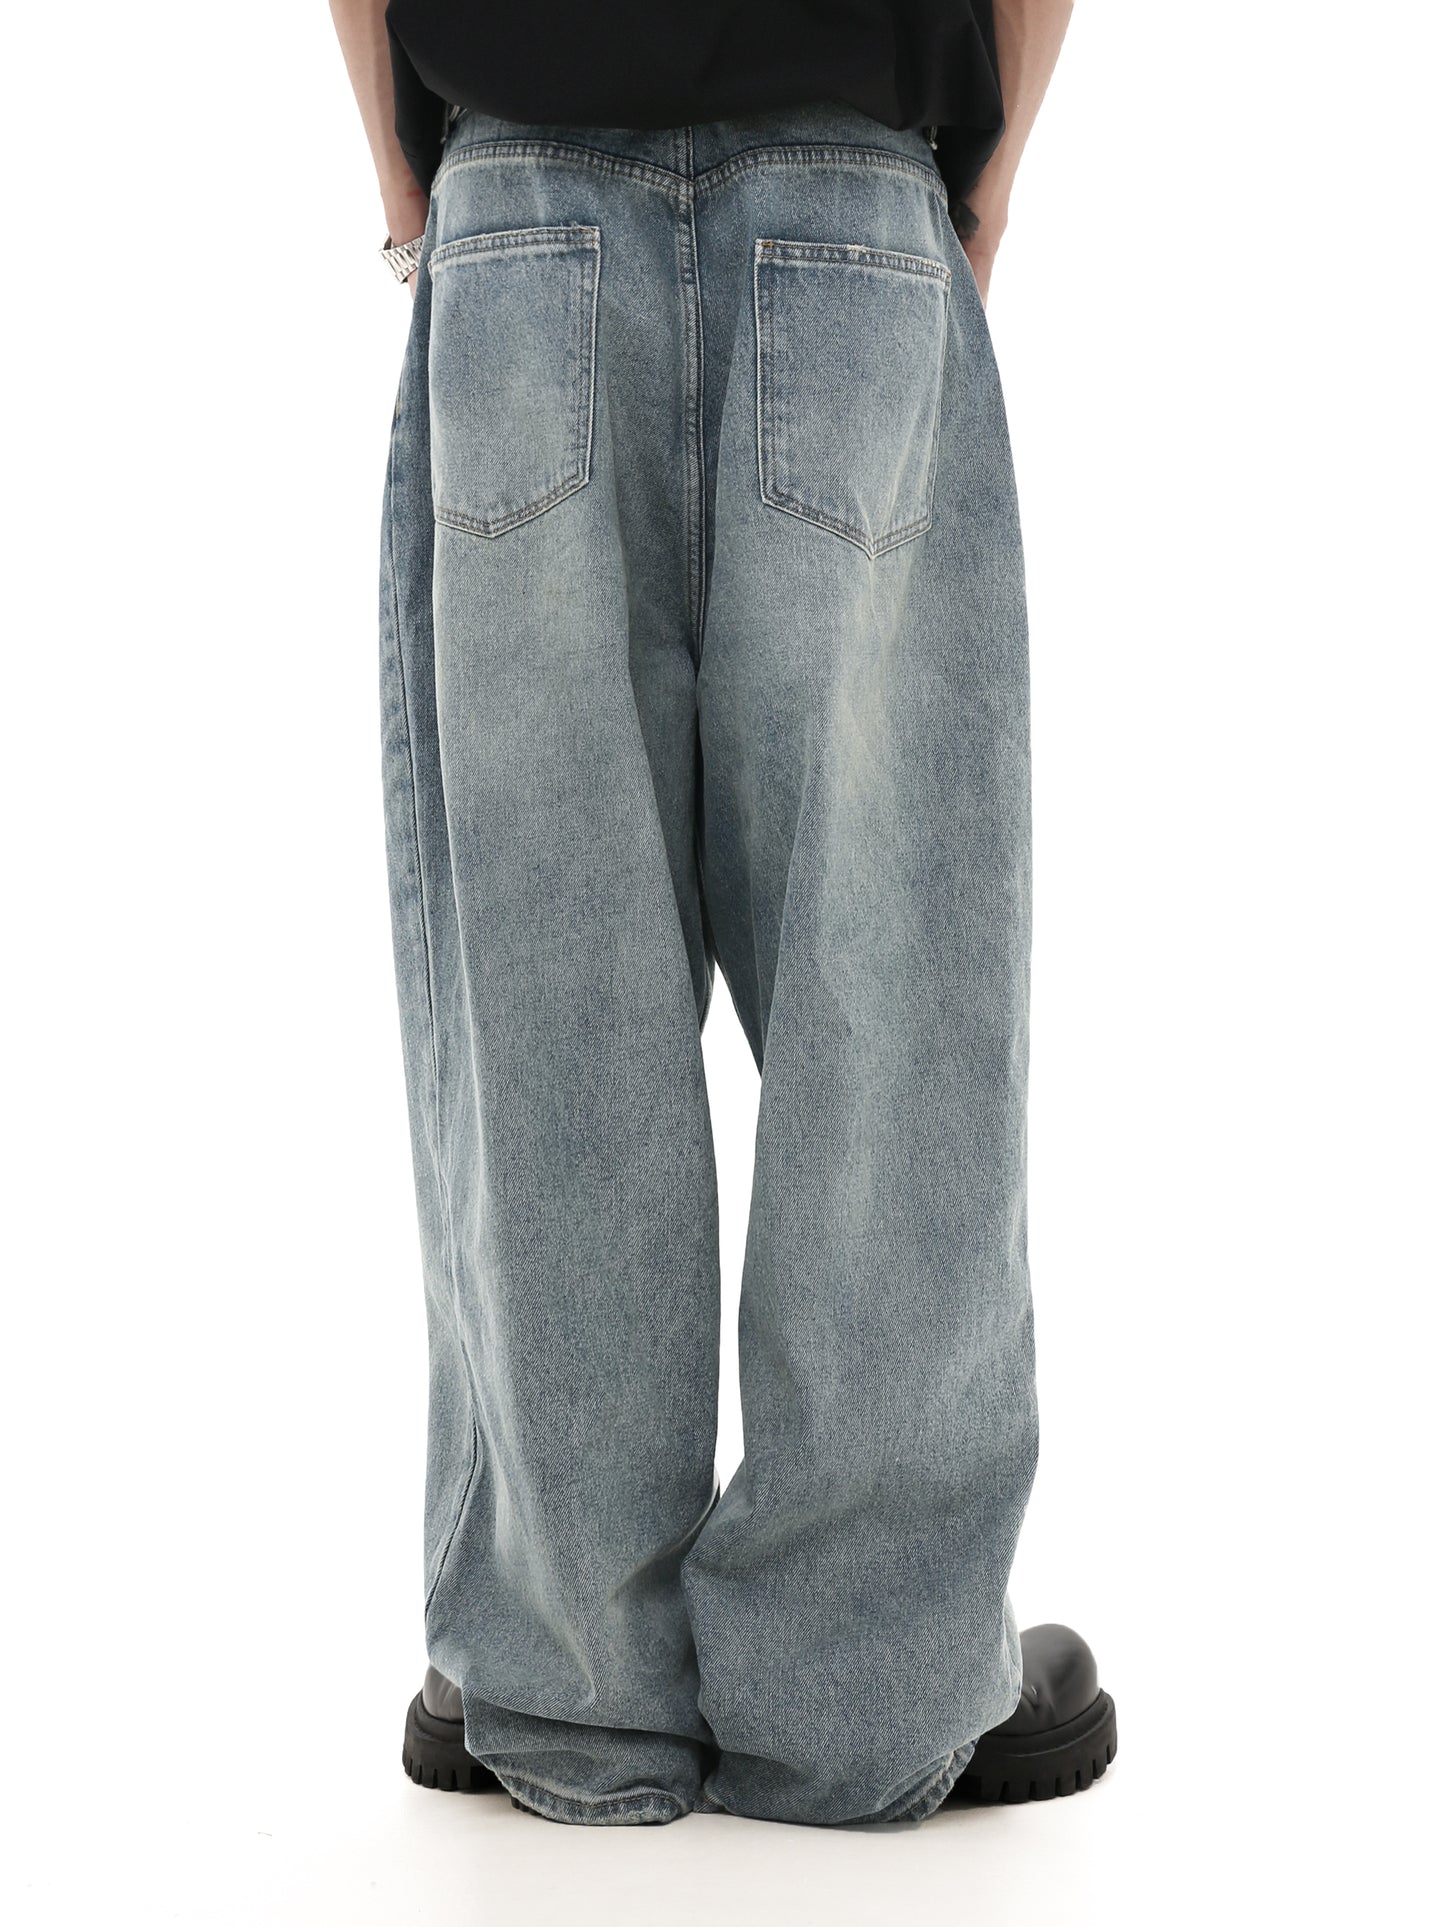 Old Draped Jeans